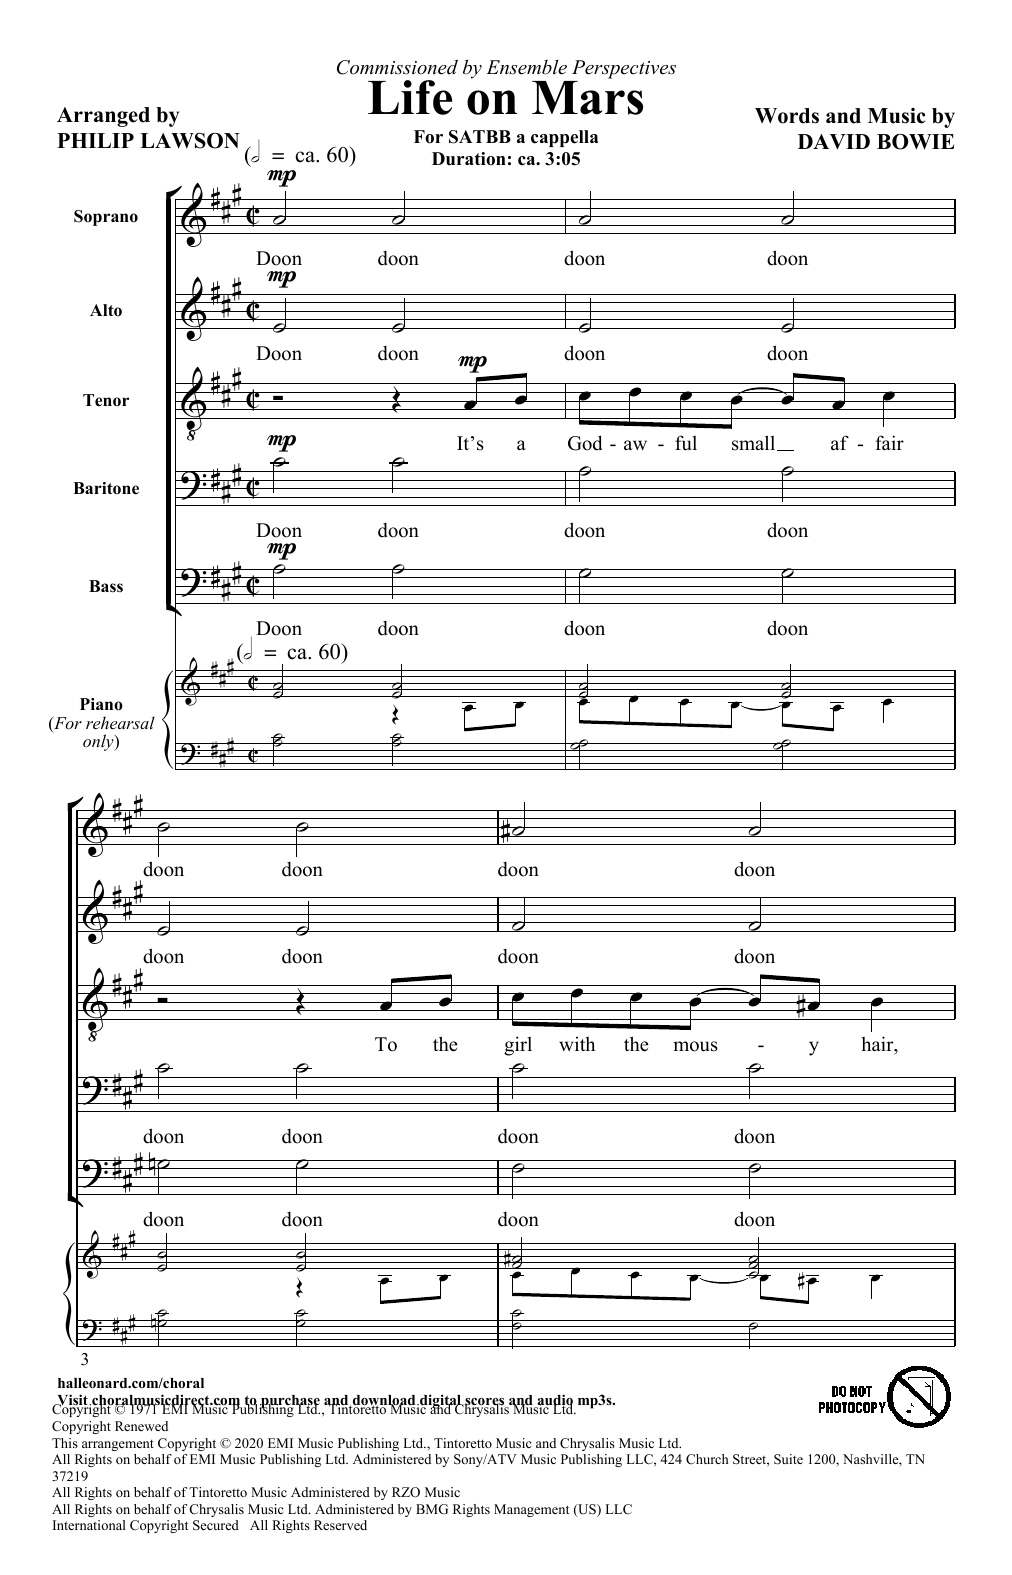 Download David Bowie Life On Mars (arr. Philip Lawson) Sheet Music